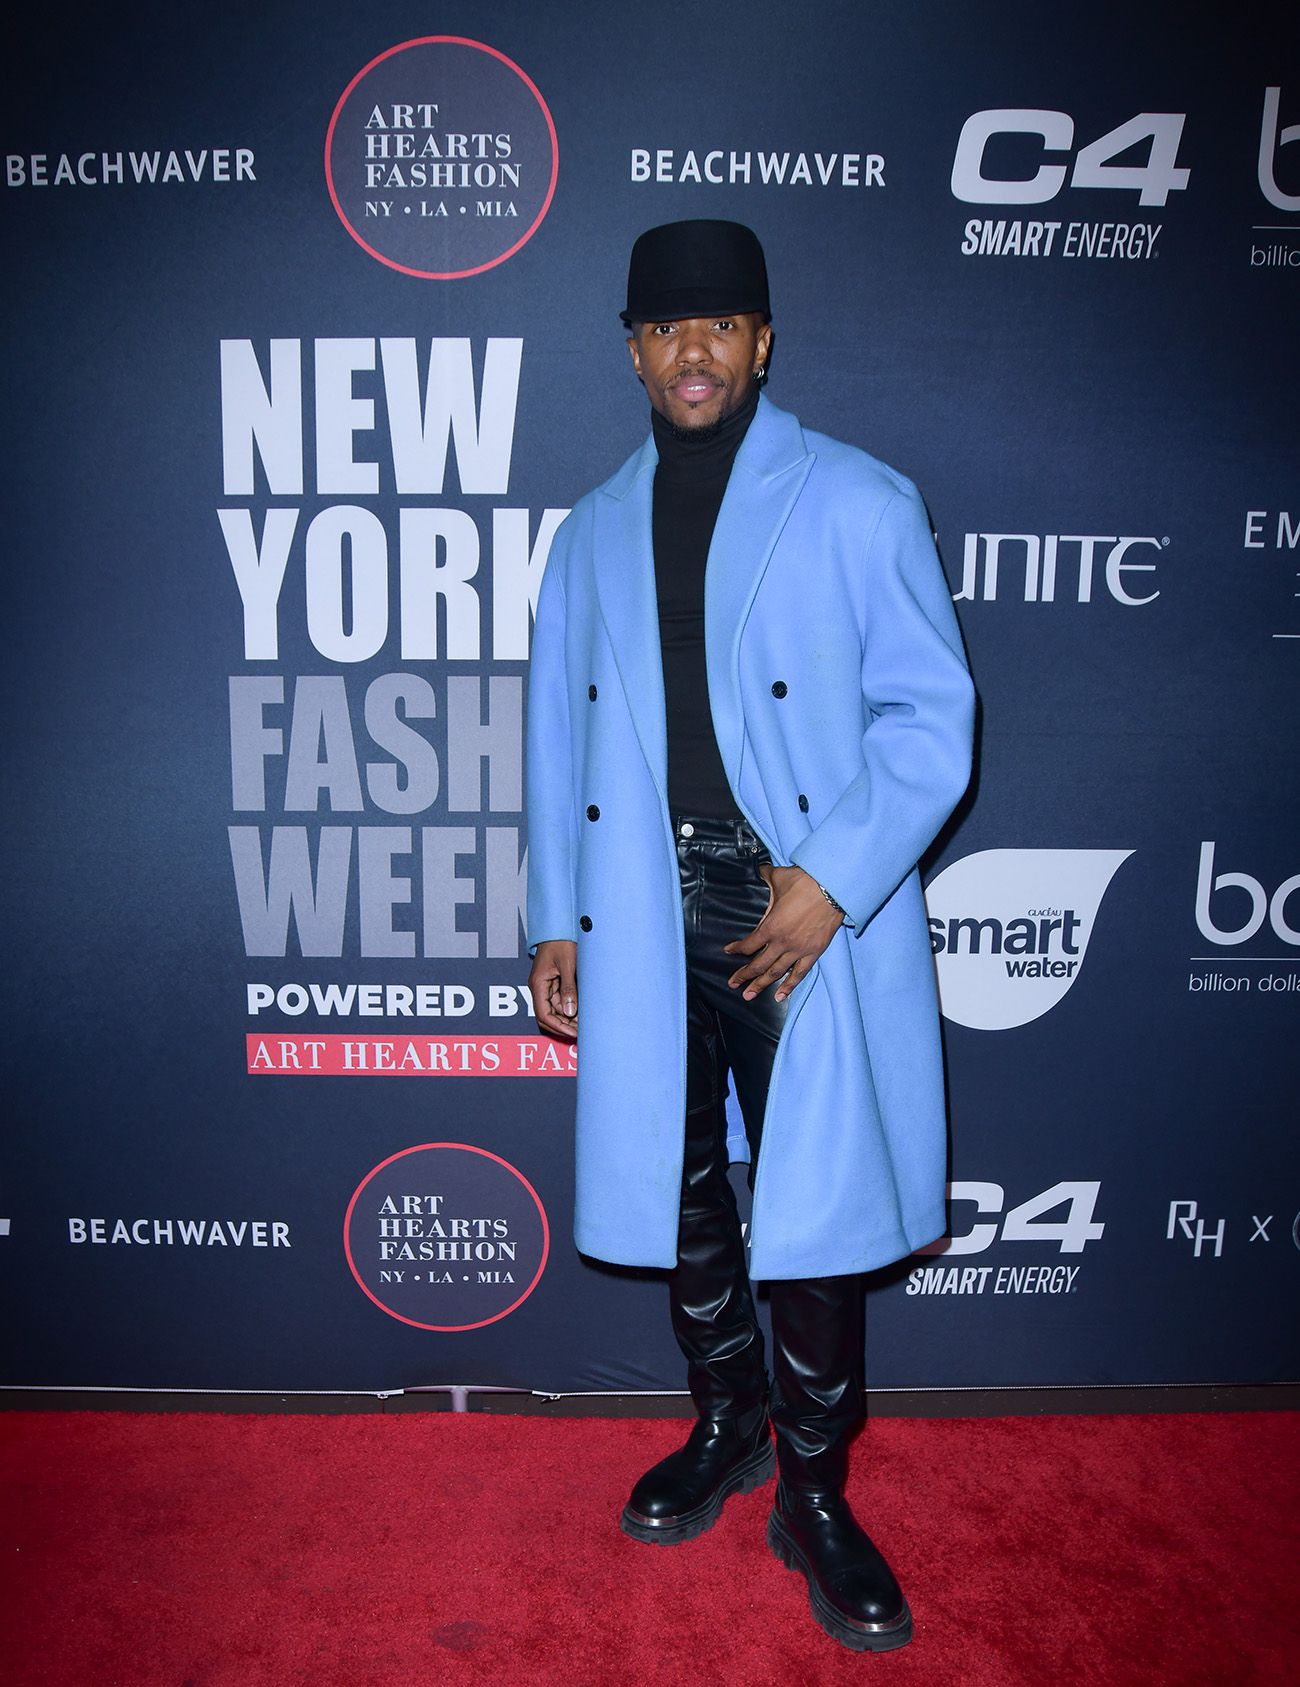 NEW YORK, NEW YORK - FEBRUARY 08: King Rich arrives on the red carpet during New York Fashion Week Powered by Art Hearts Fashion at The Angel Orensanz Foundation on February 08, 2024 in New York City.  (Photo by Mark Gunter/Getty Images for Art Hearts Fashion)